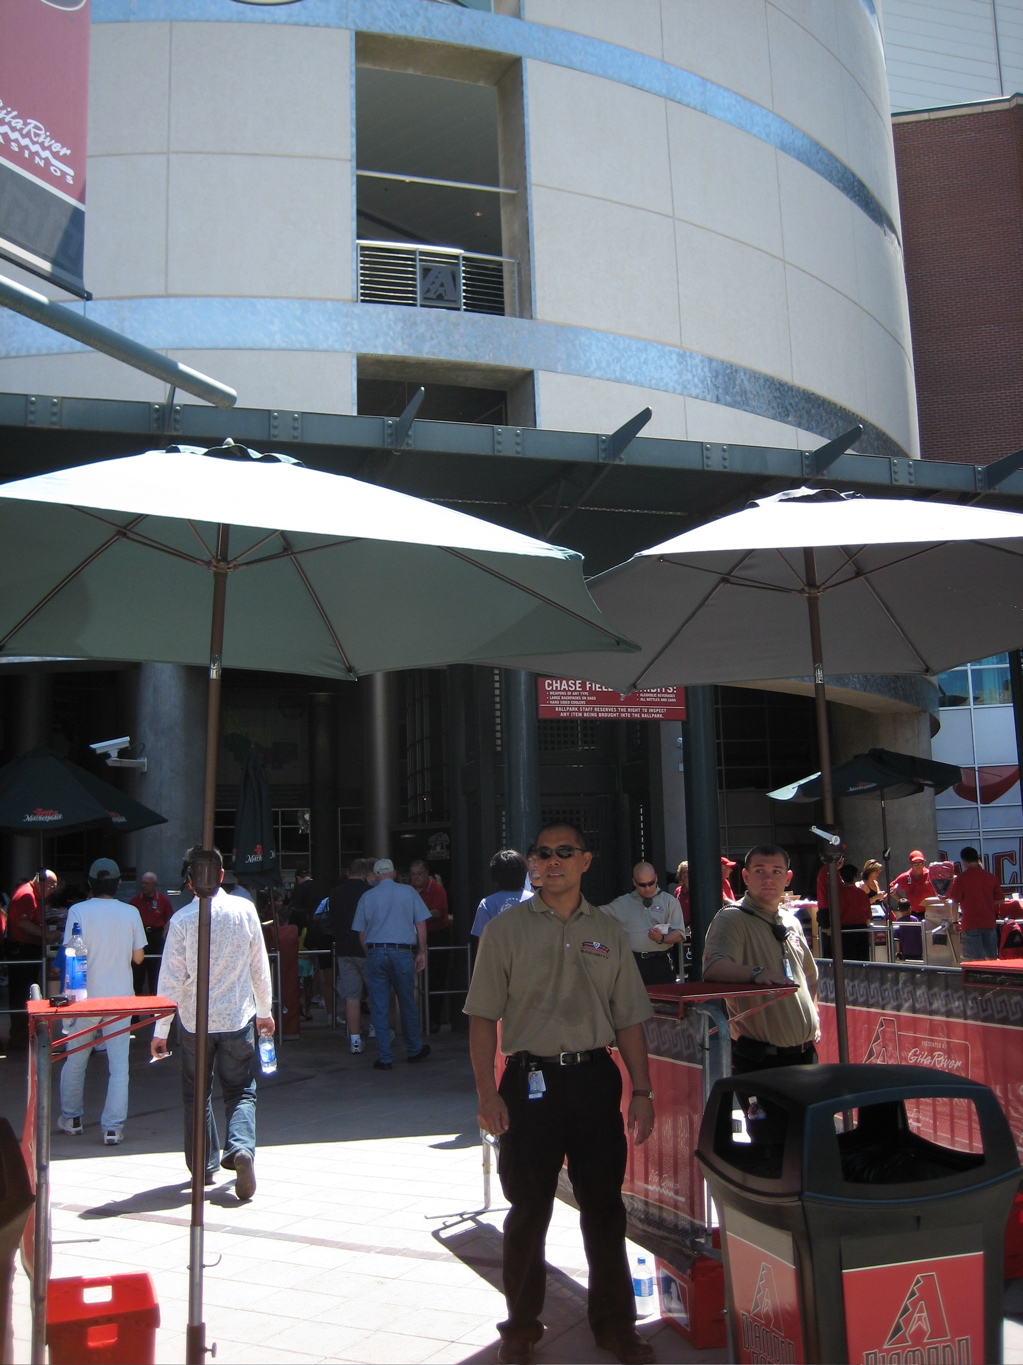 Chase Field4 Entrance